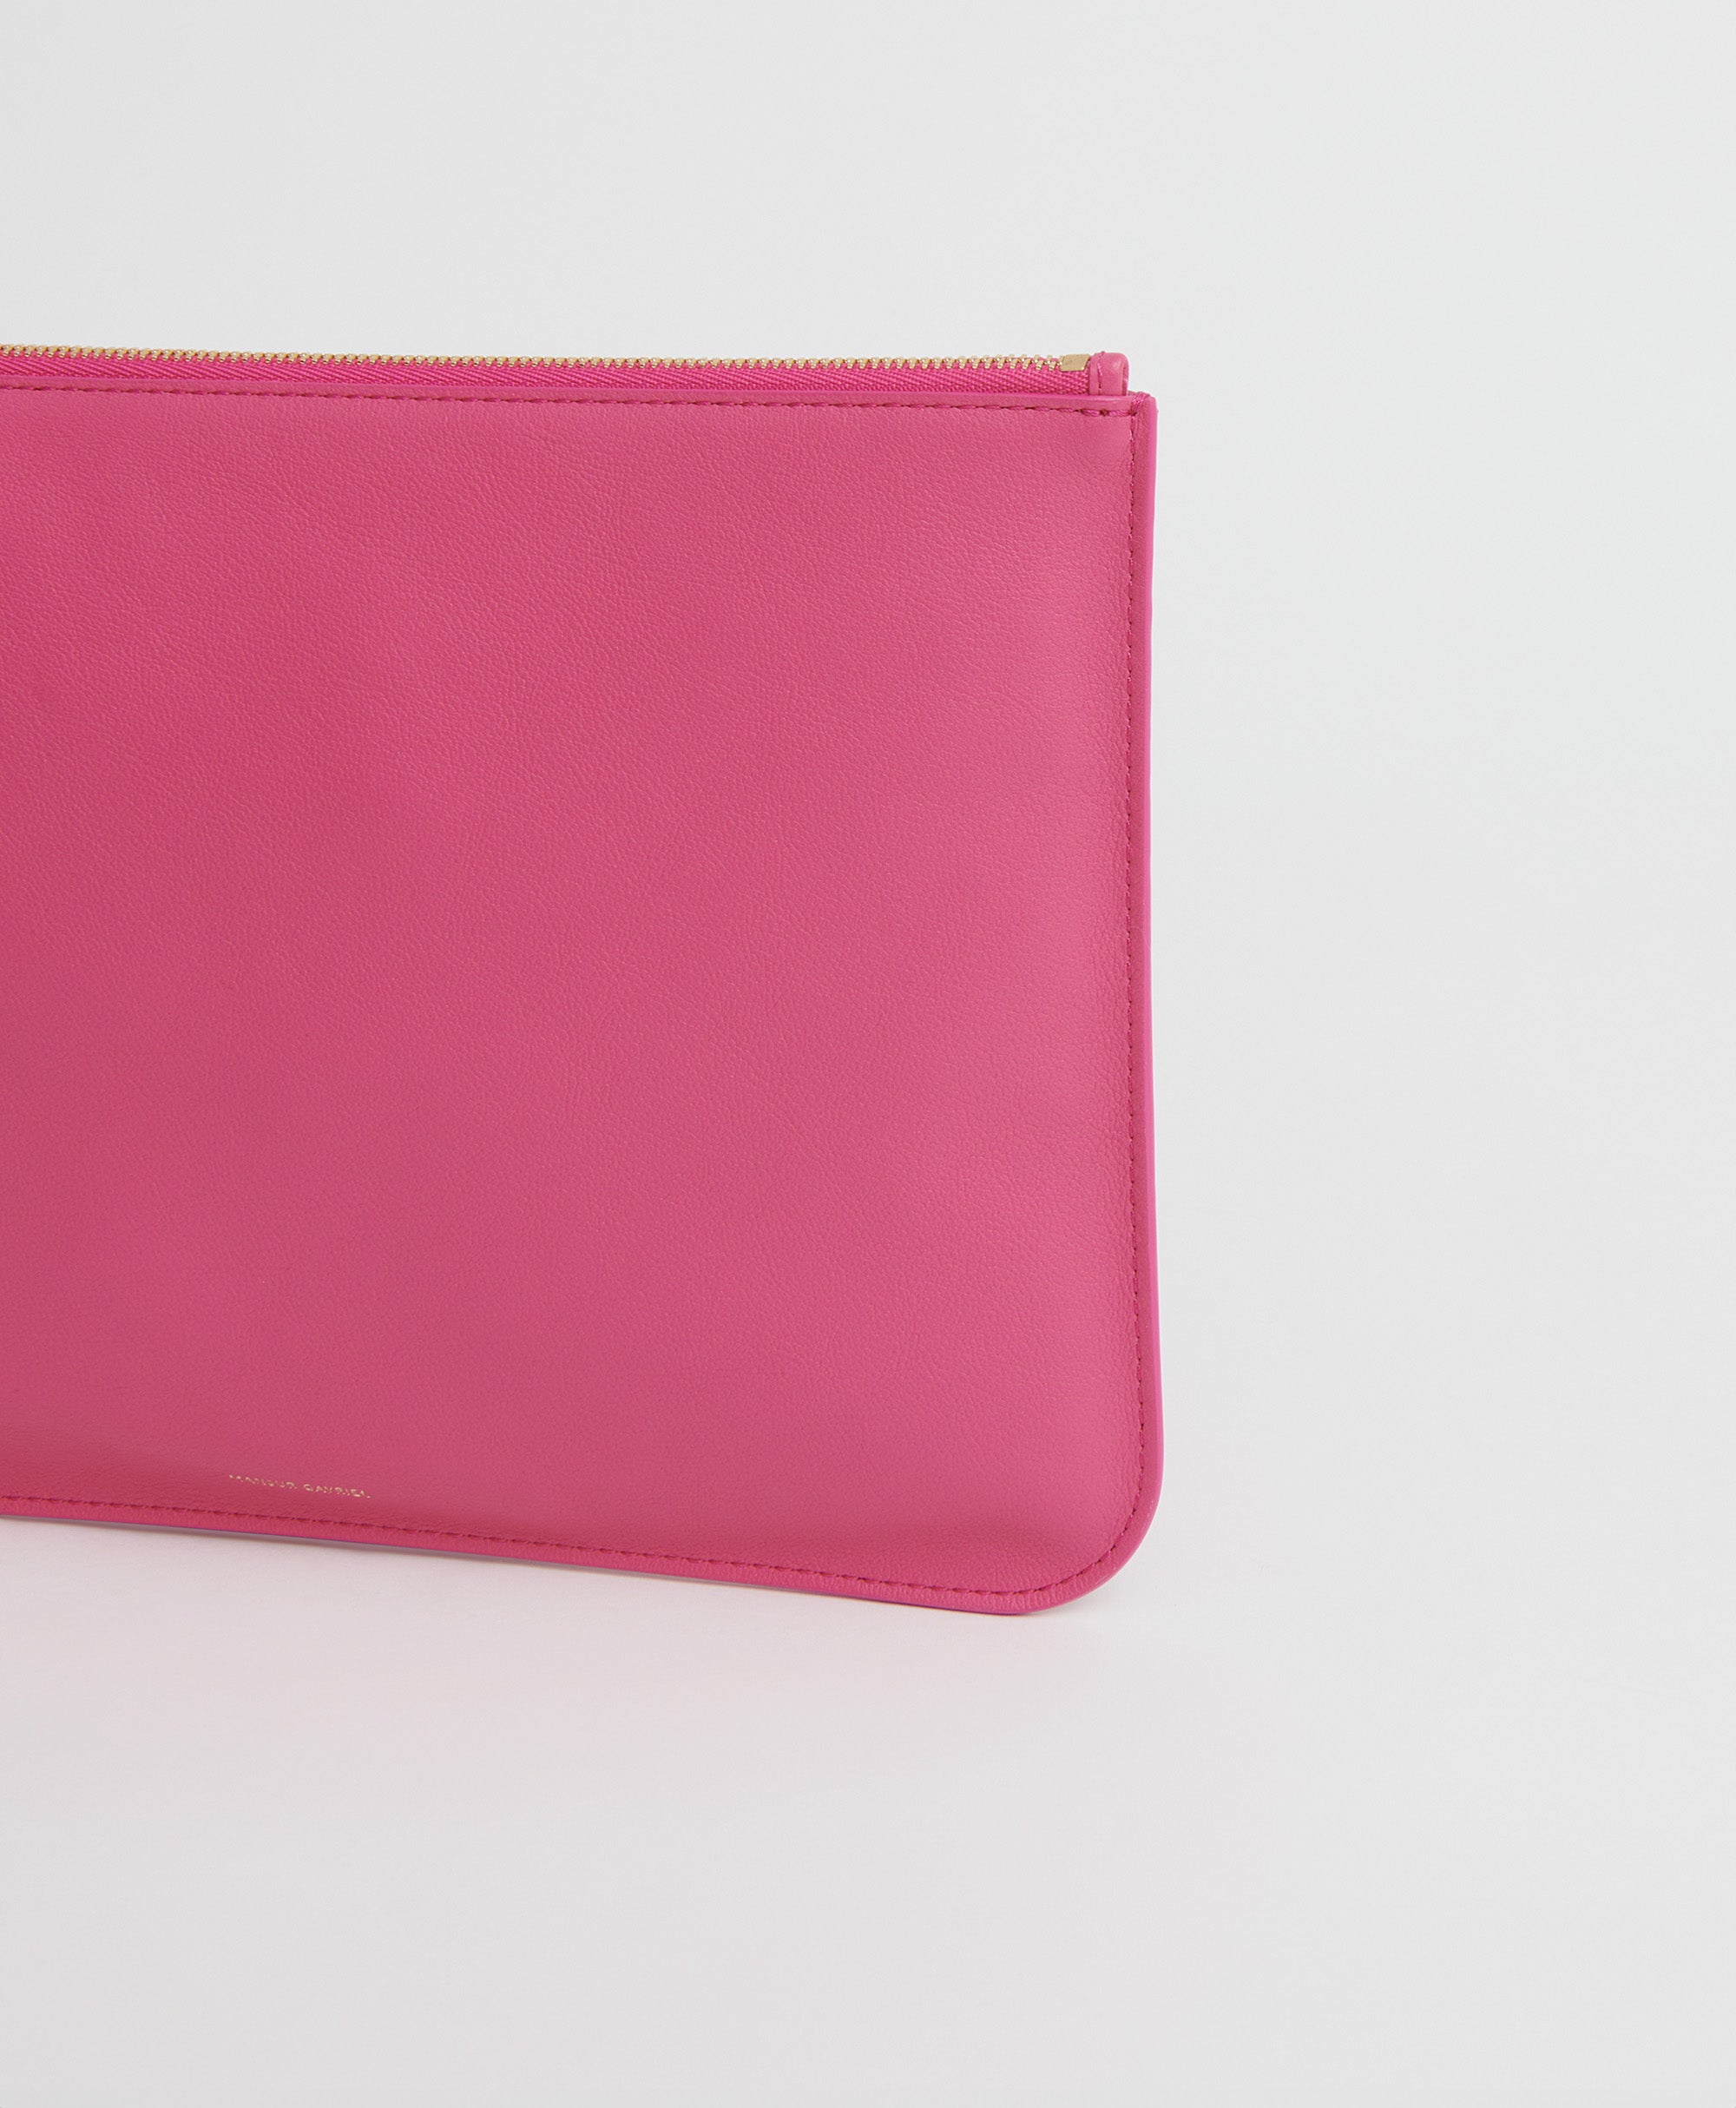 Clutch bags – Lucy Houle England